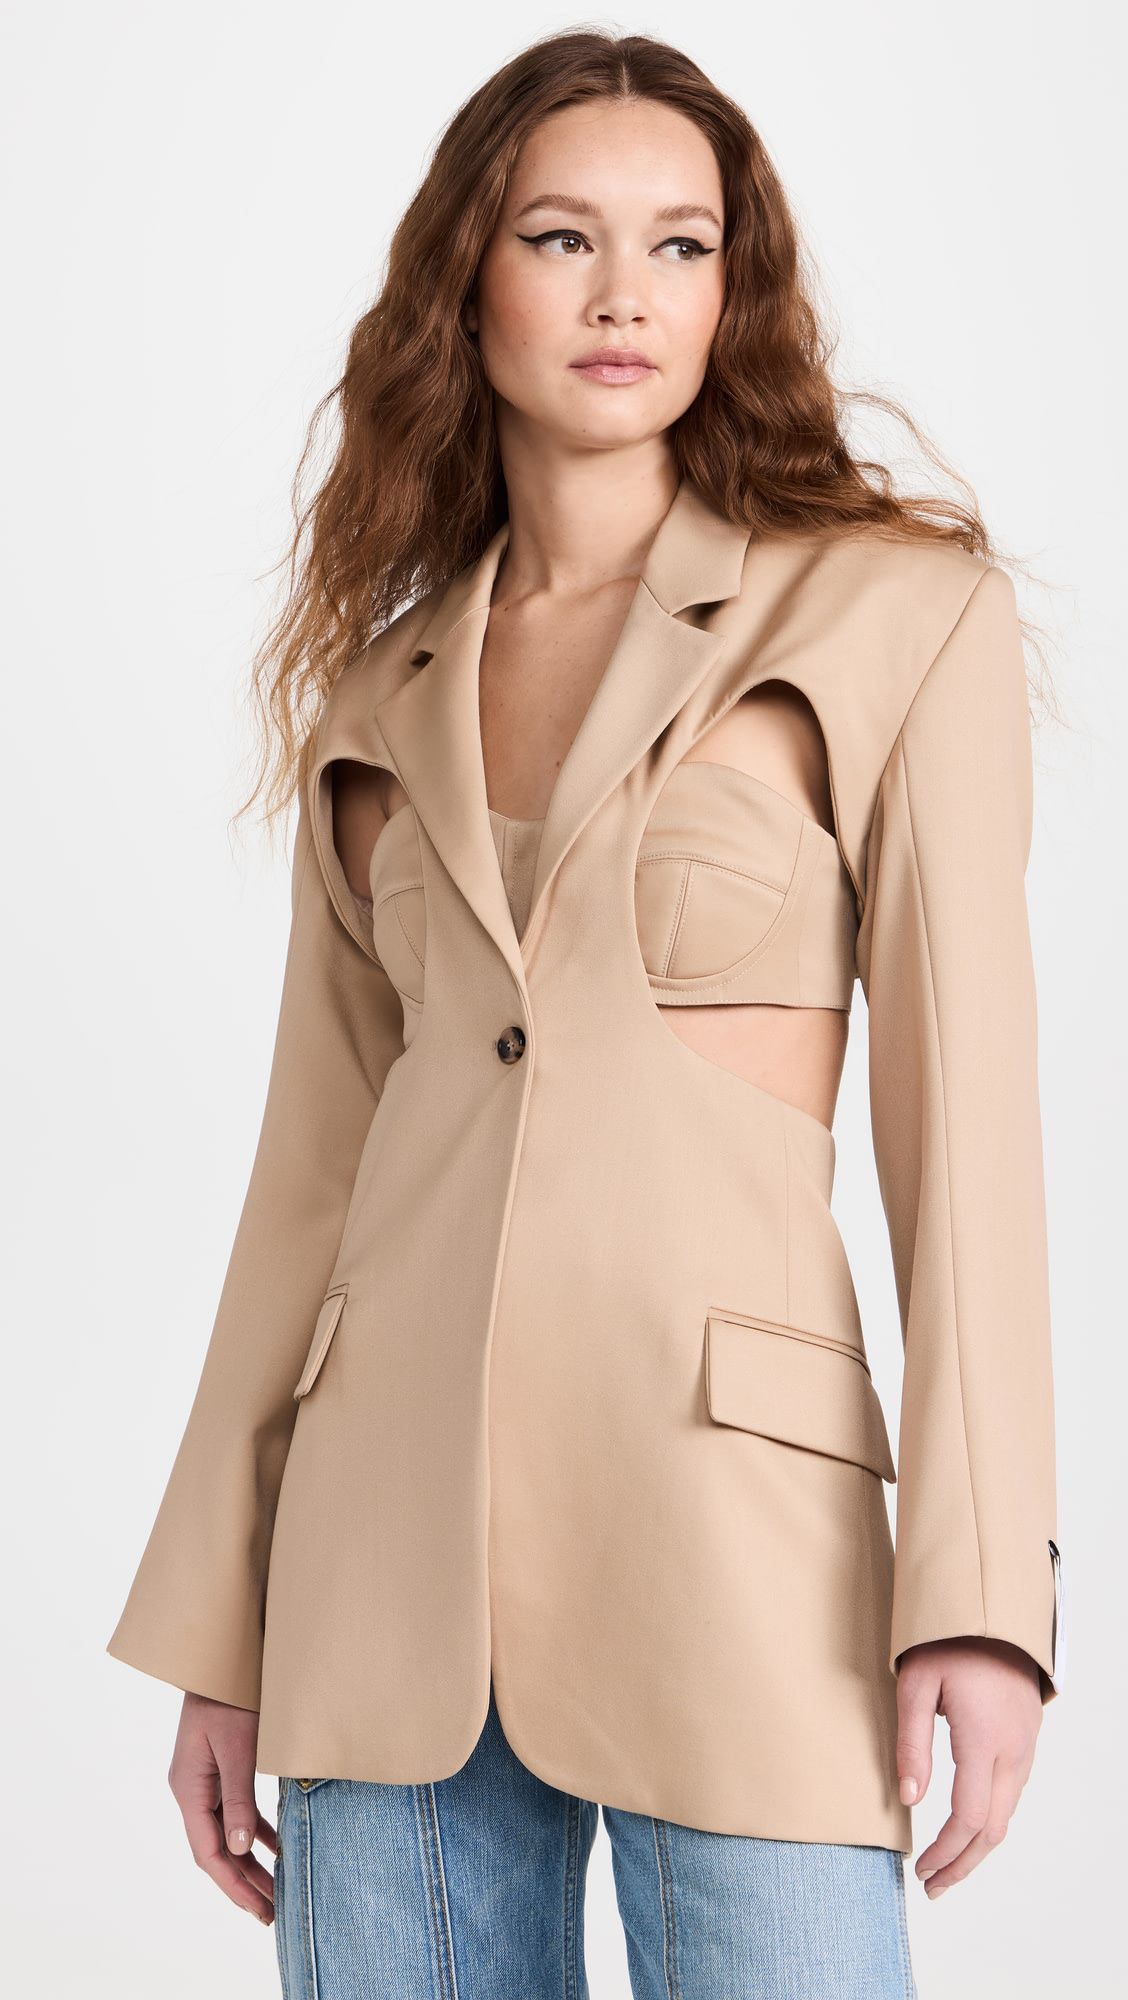 Made in china khaki cut-out back suit sexy jacket